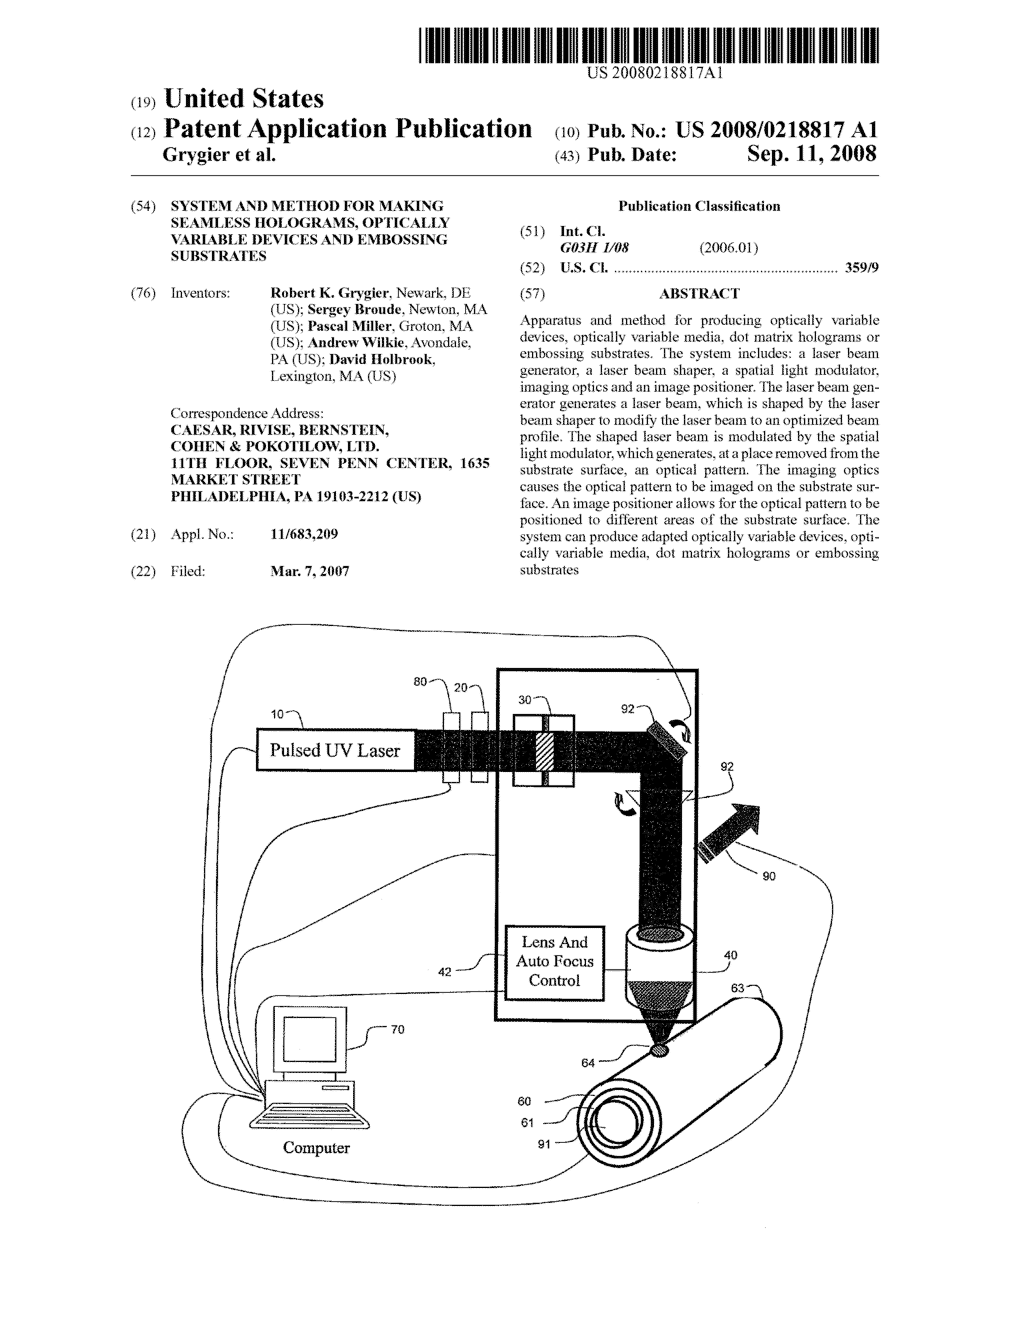 SYSTEM AND METHOD FOR MAKING SEAMLESS HOLOGRAMS, OPTICALLY VARIABLE DEVICES AND EMBOSSING SUBSTRATES - diagram, schematic, and image 01